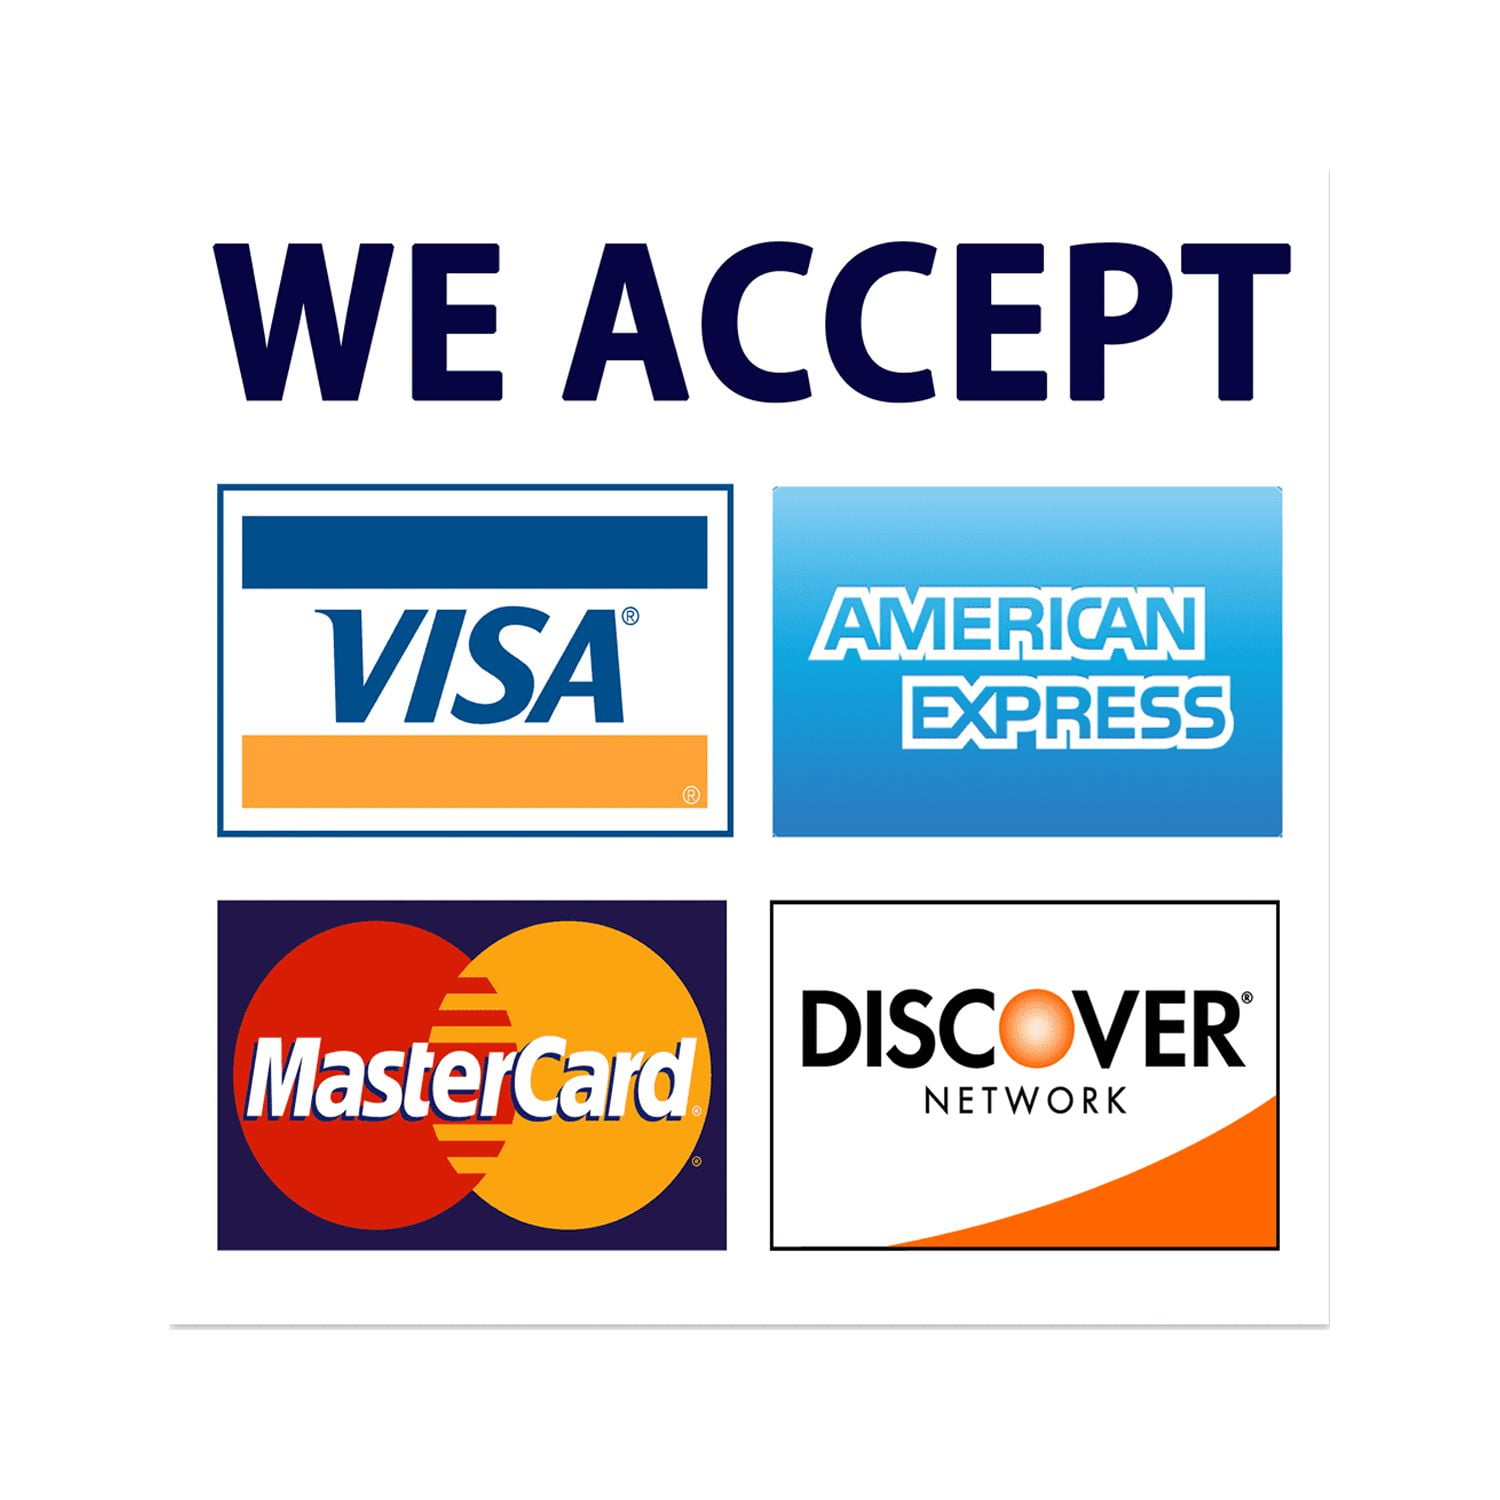 WE ACCEPT CEDIT CARDS